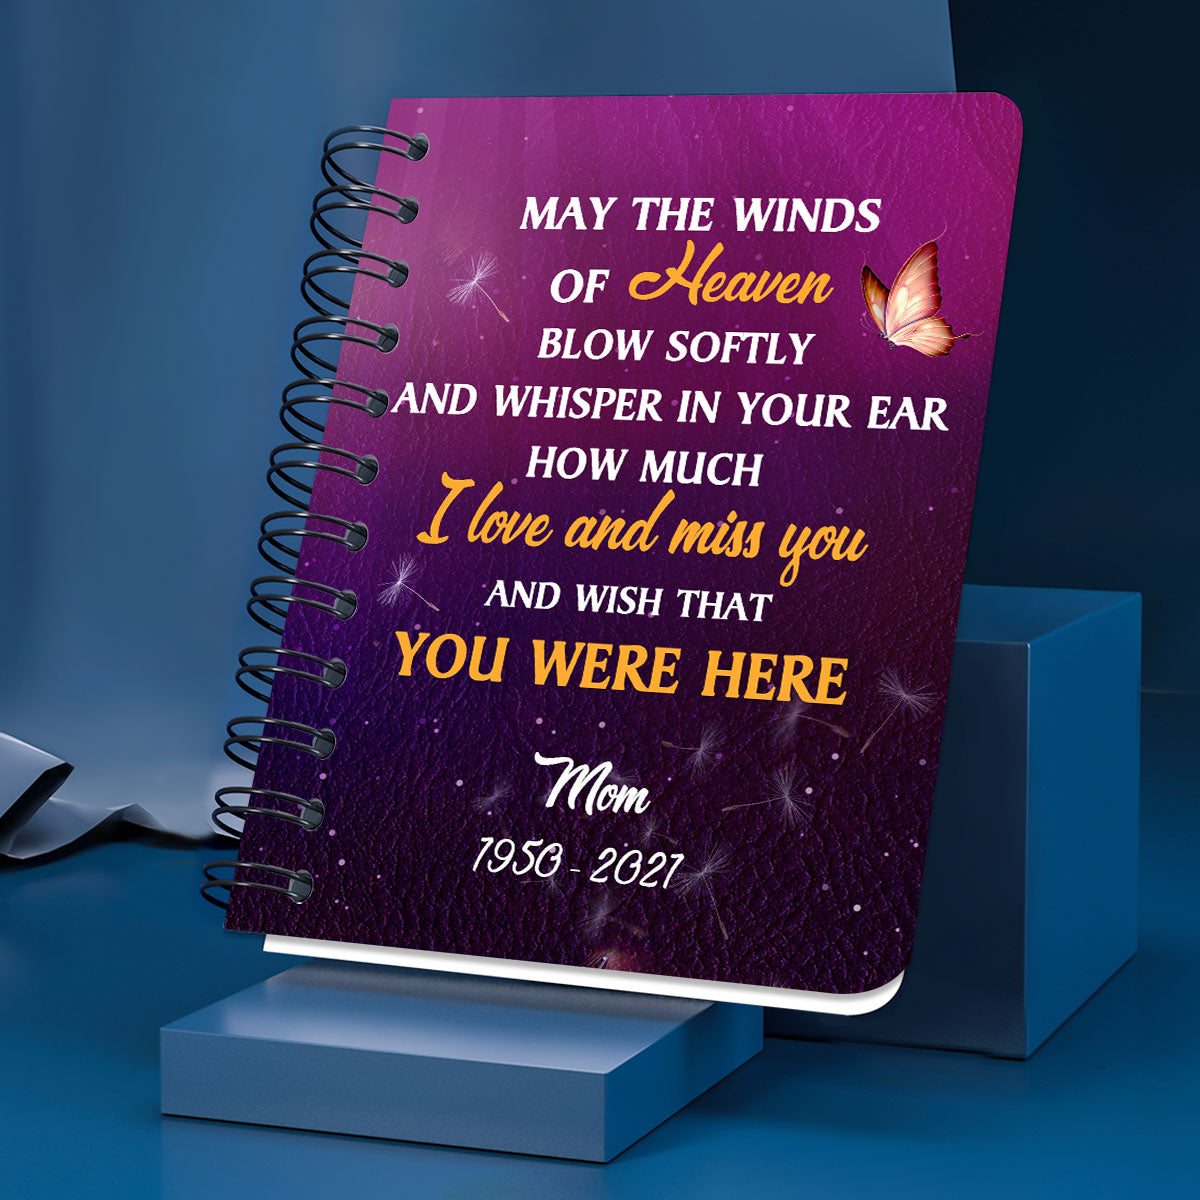 Wish That You Were Here Personalized Memorial Spiral Journal, Inspiration Gifts For Christian People